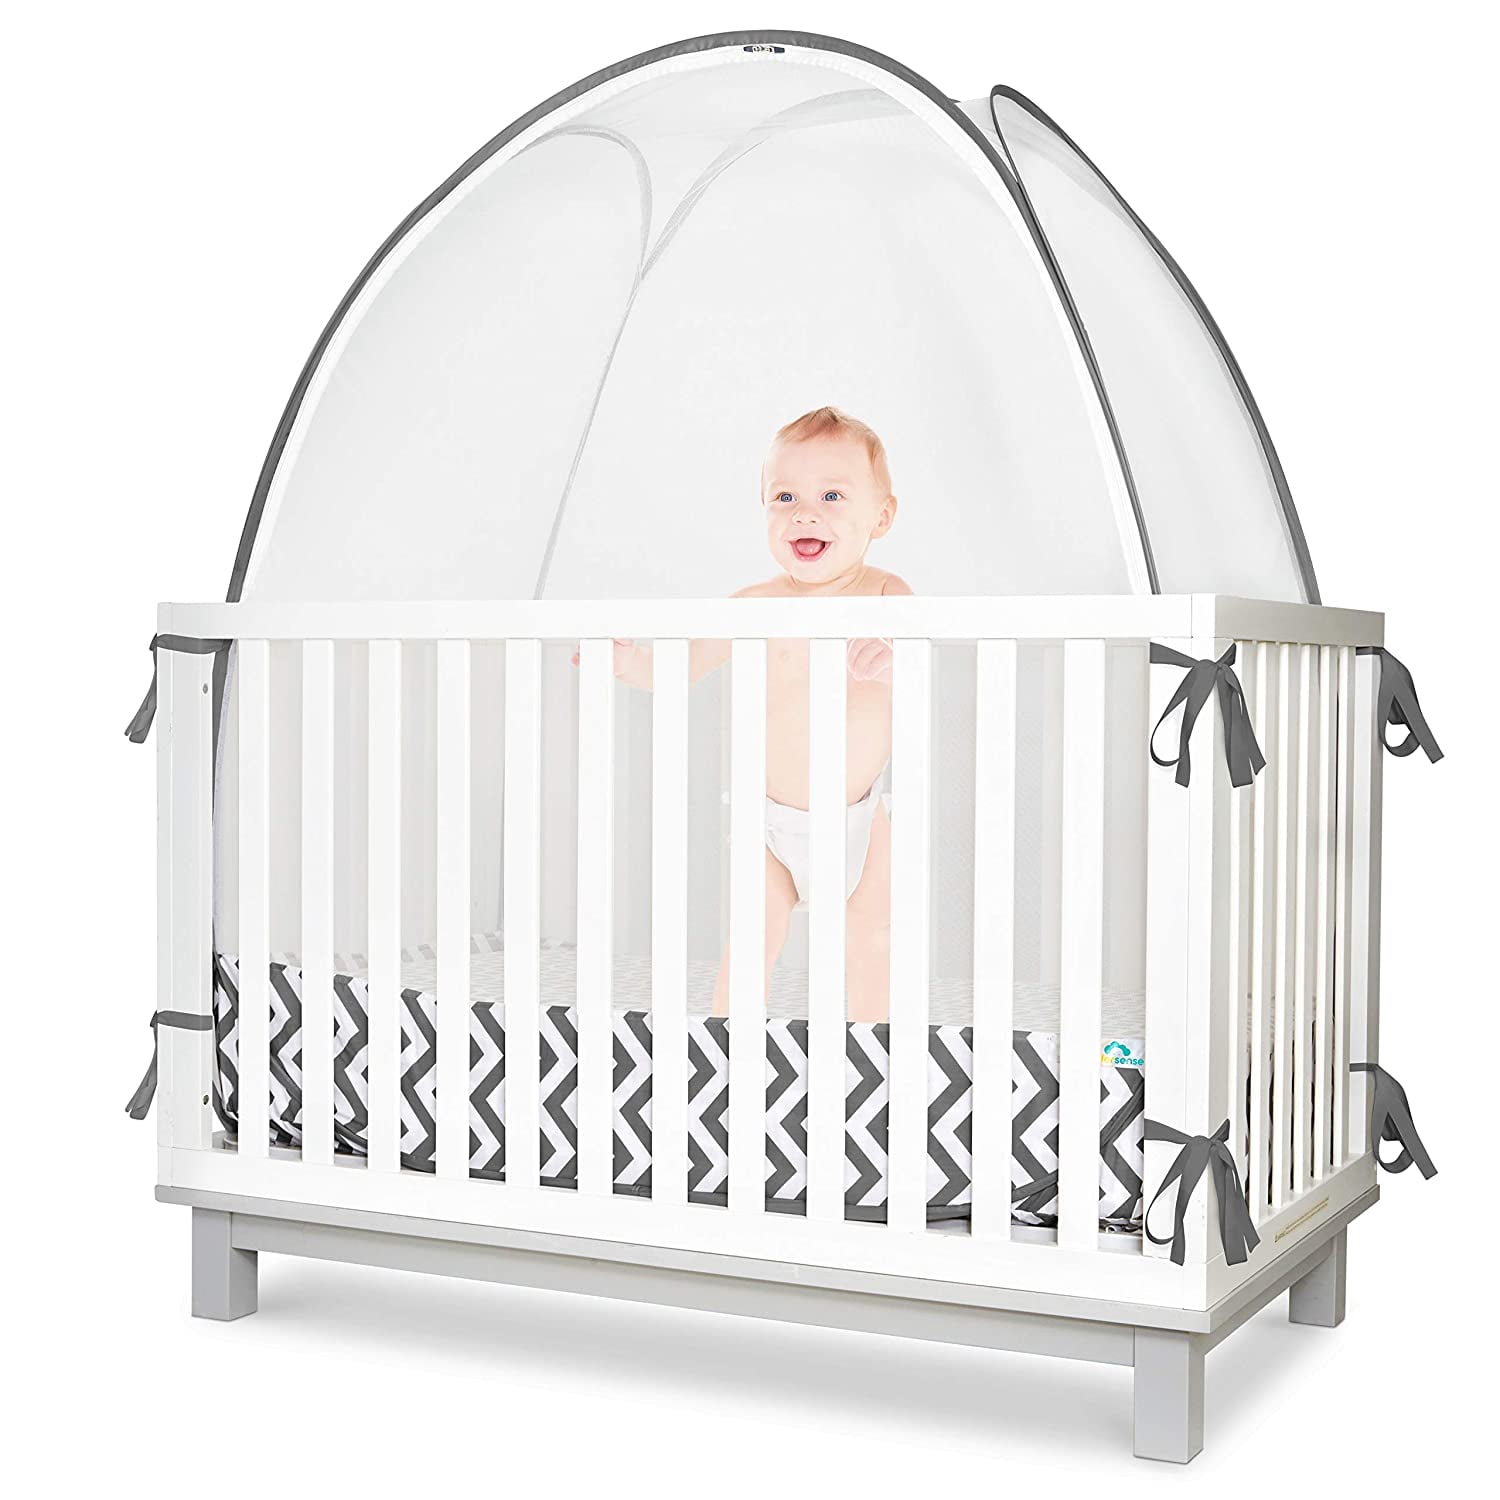 Crib Safety Canopy Net or Tent Pop Up Mesh Cover Stops Climbing Stuck Limbs See Through Netting for Baby & Toddler Bed with Ties Zippers Bags by Baby Movs 48x24x48 in Stars 